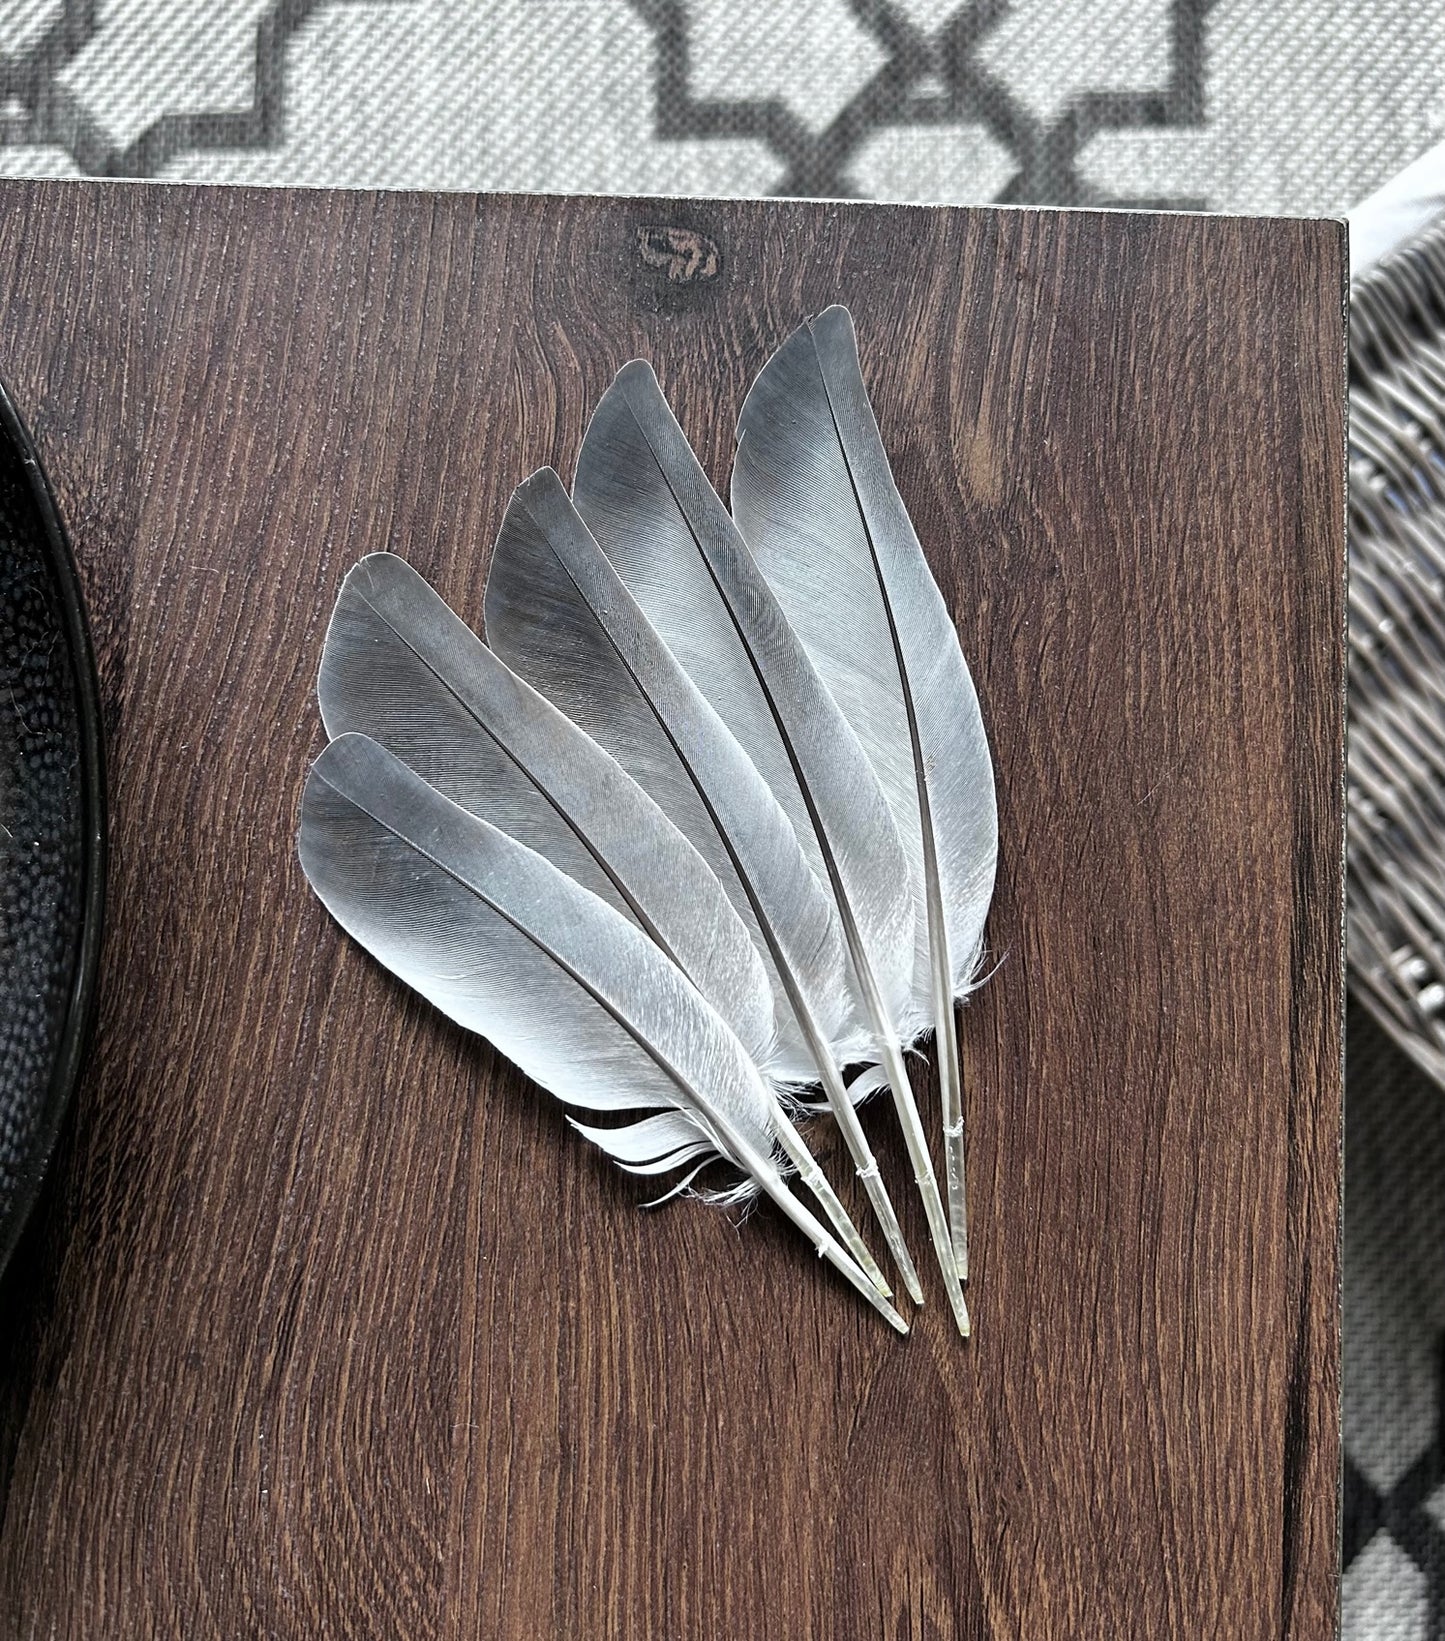 Homing Pigeon Feathers